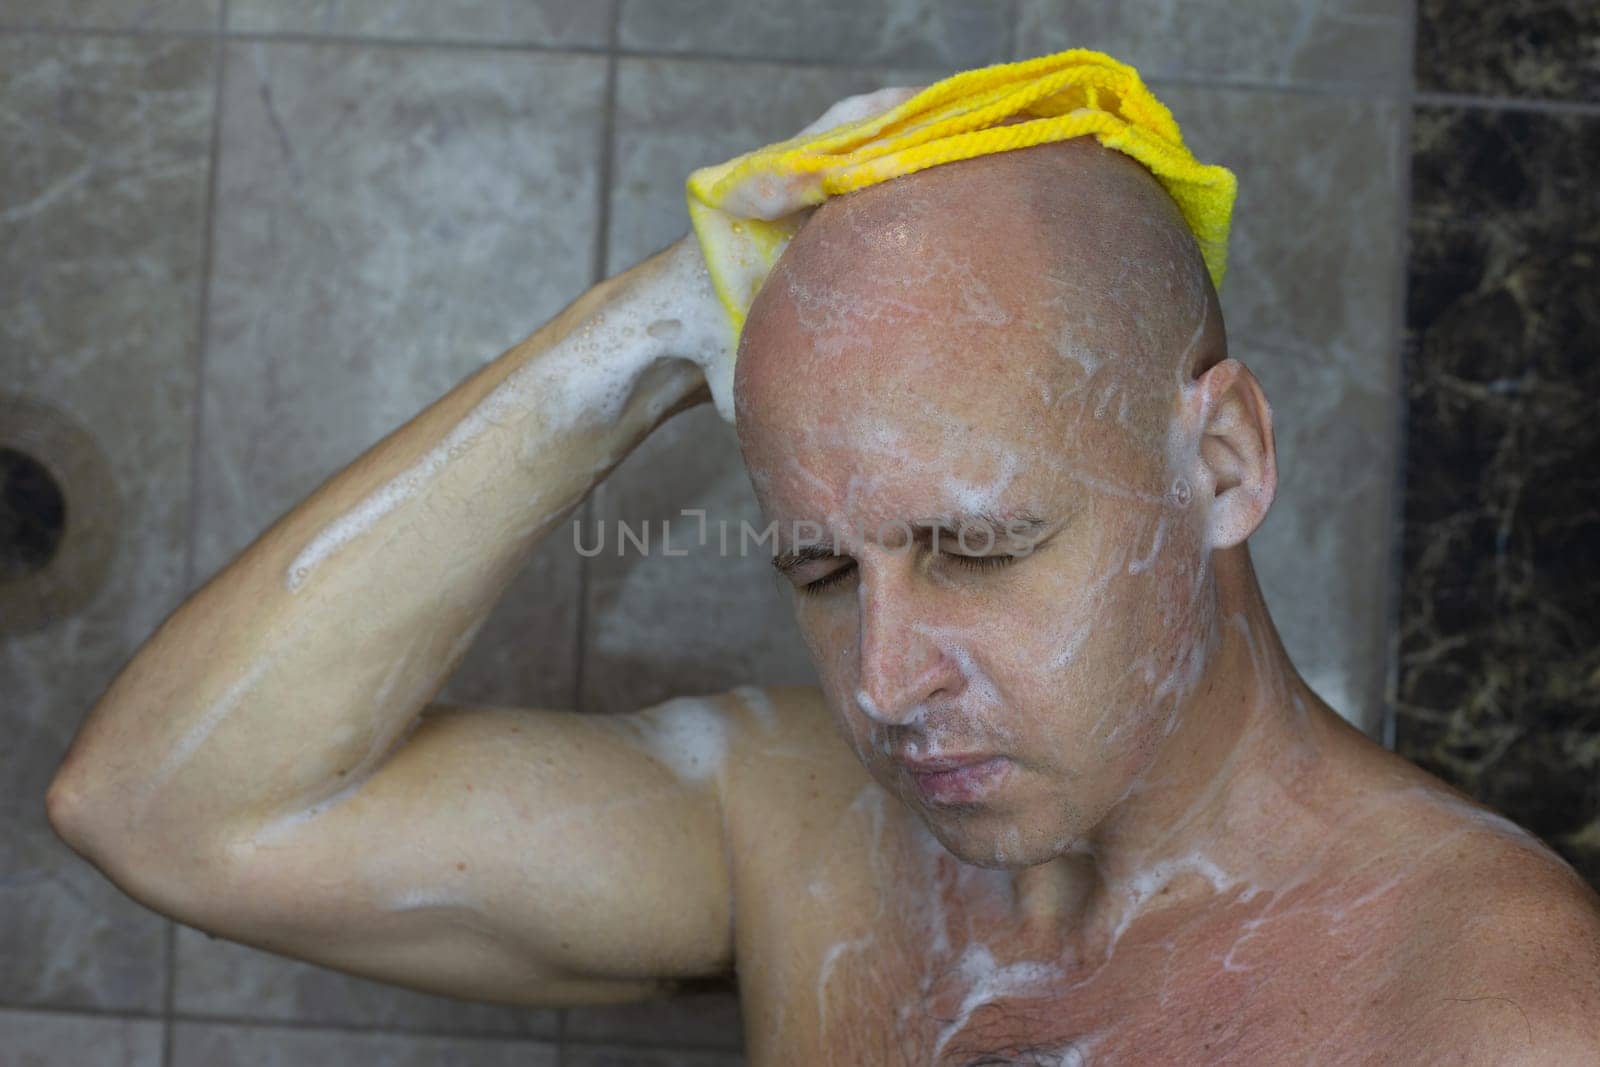 Bald European man washes his head in the shower by timurmalazoniia